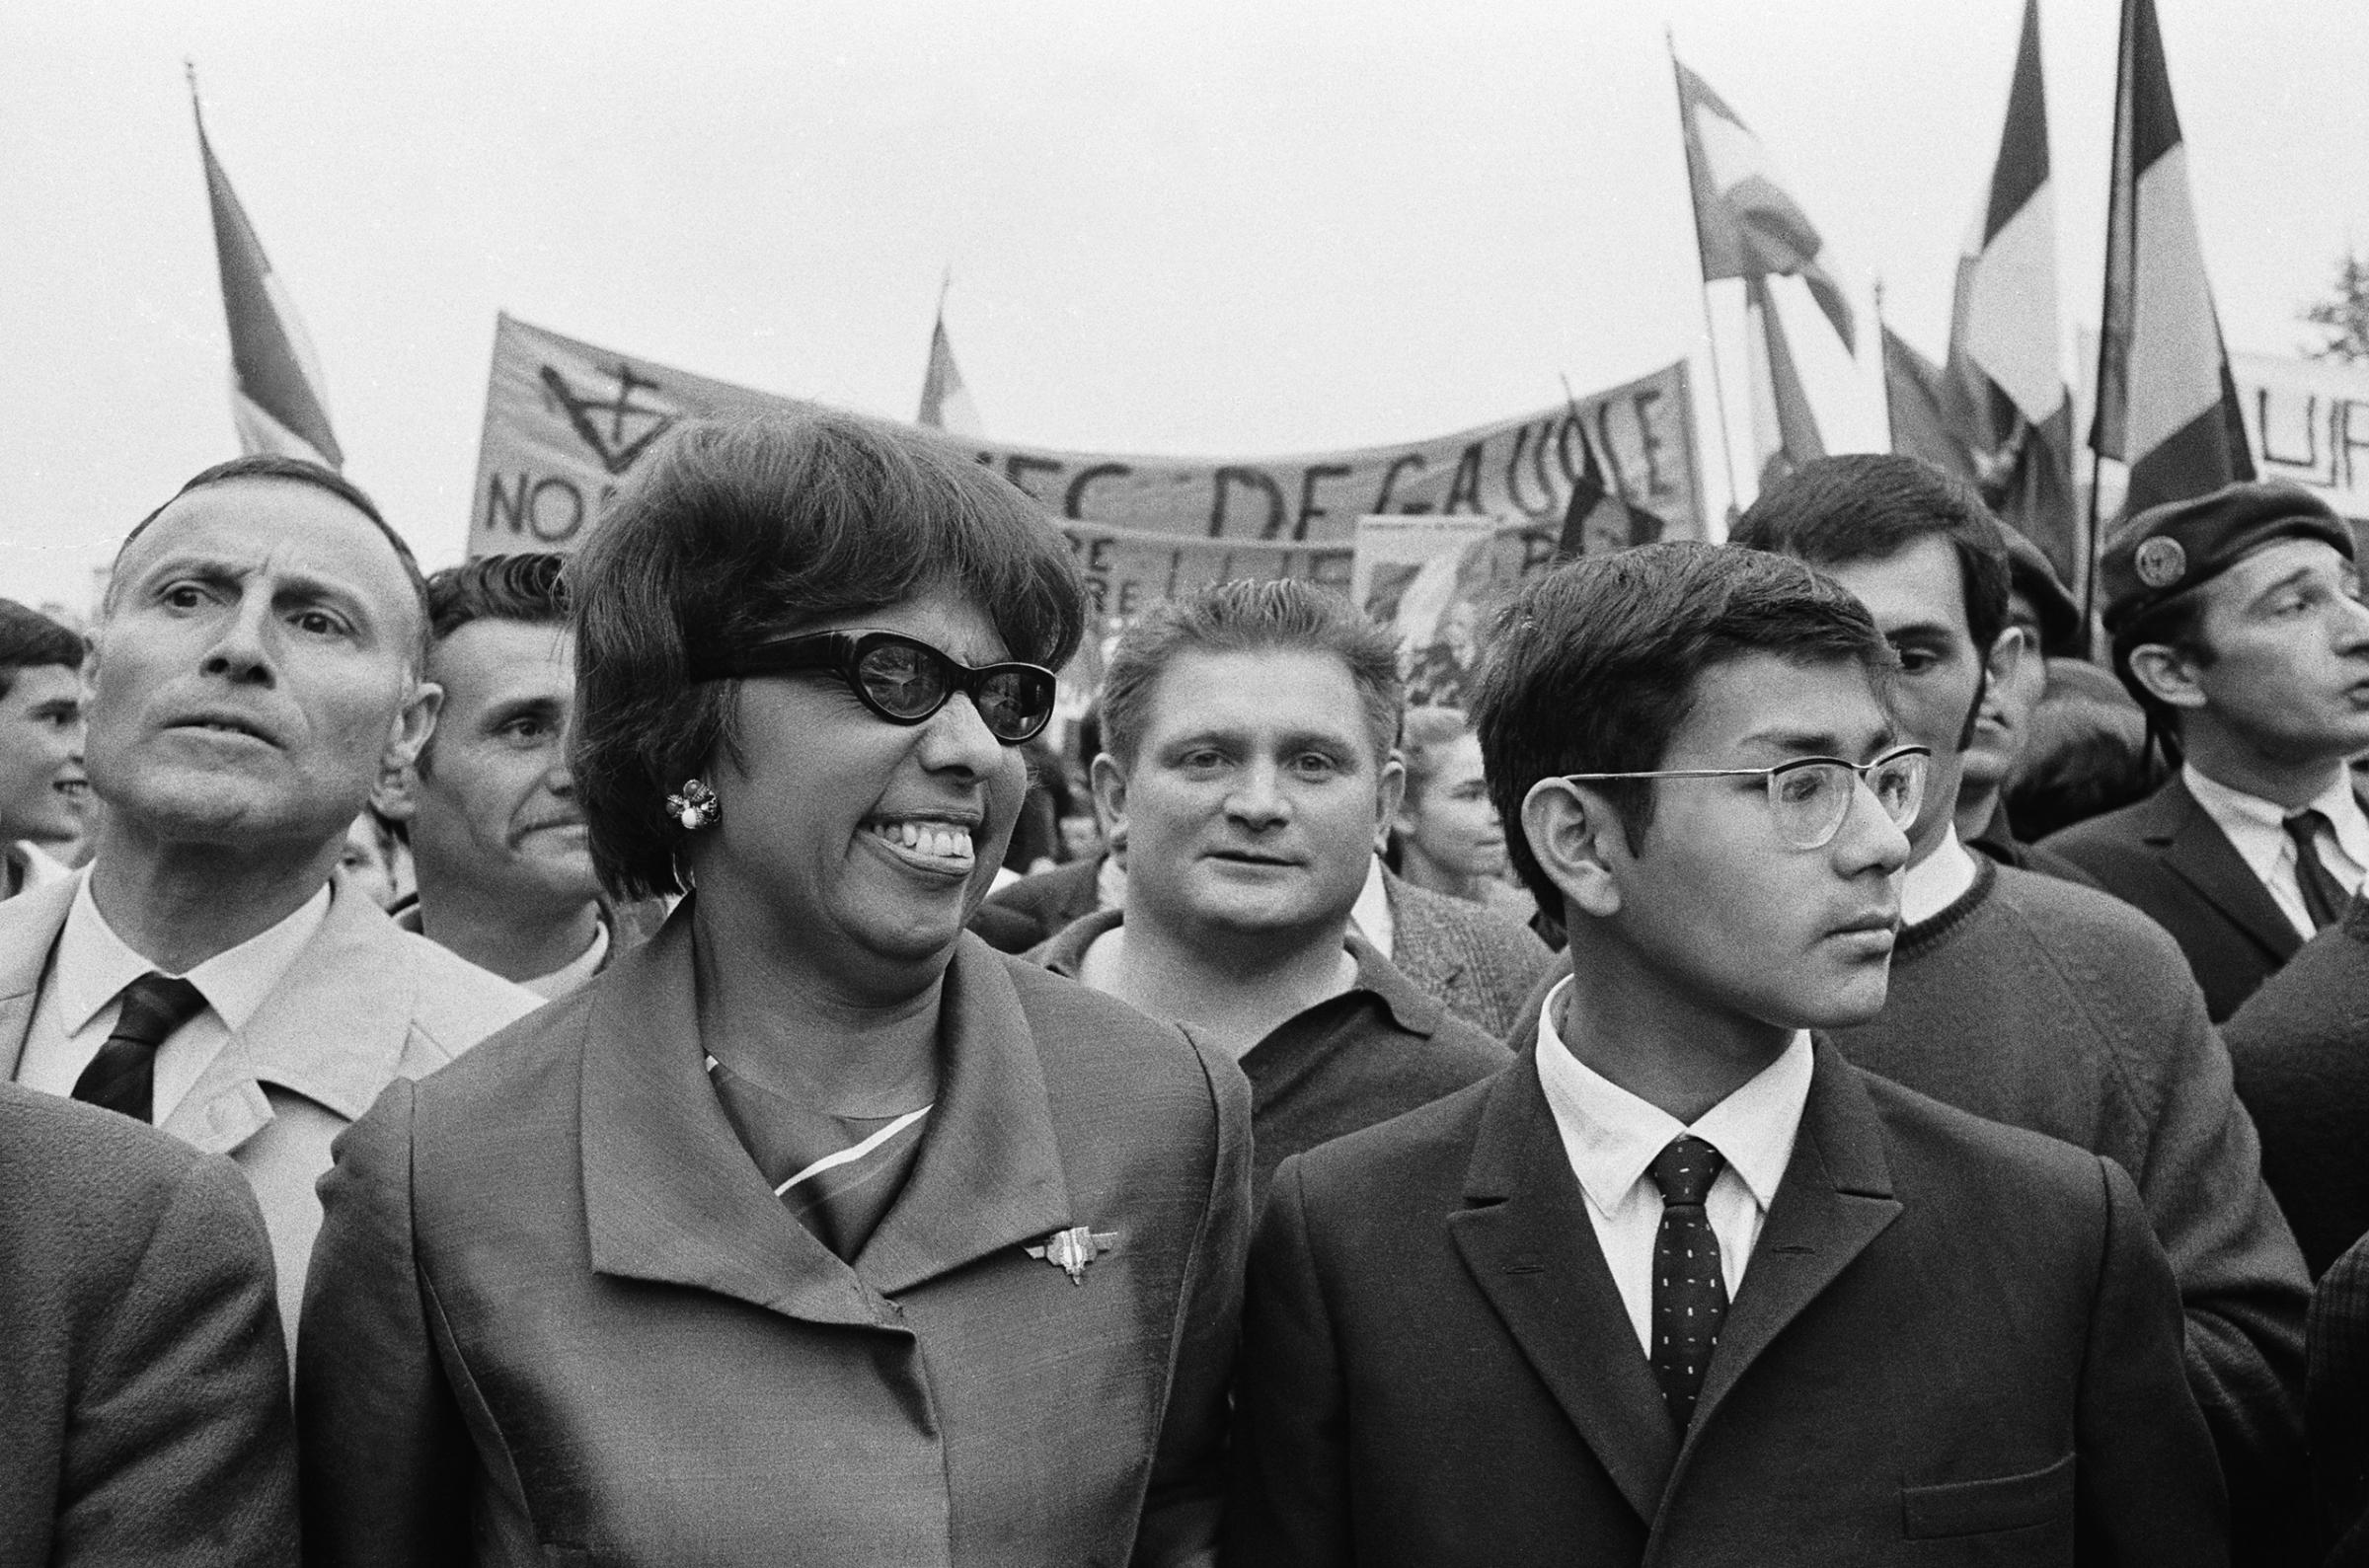 Josephine Baker at a demonstration in Paris, France On May 30, 1968.